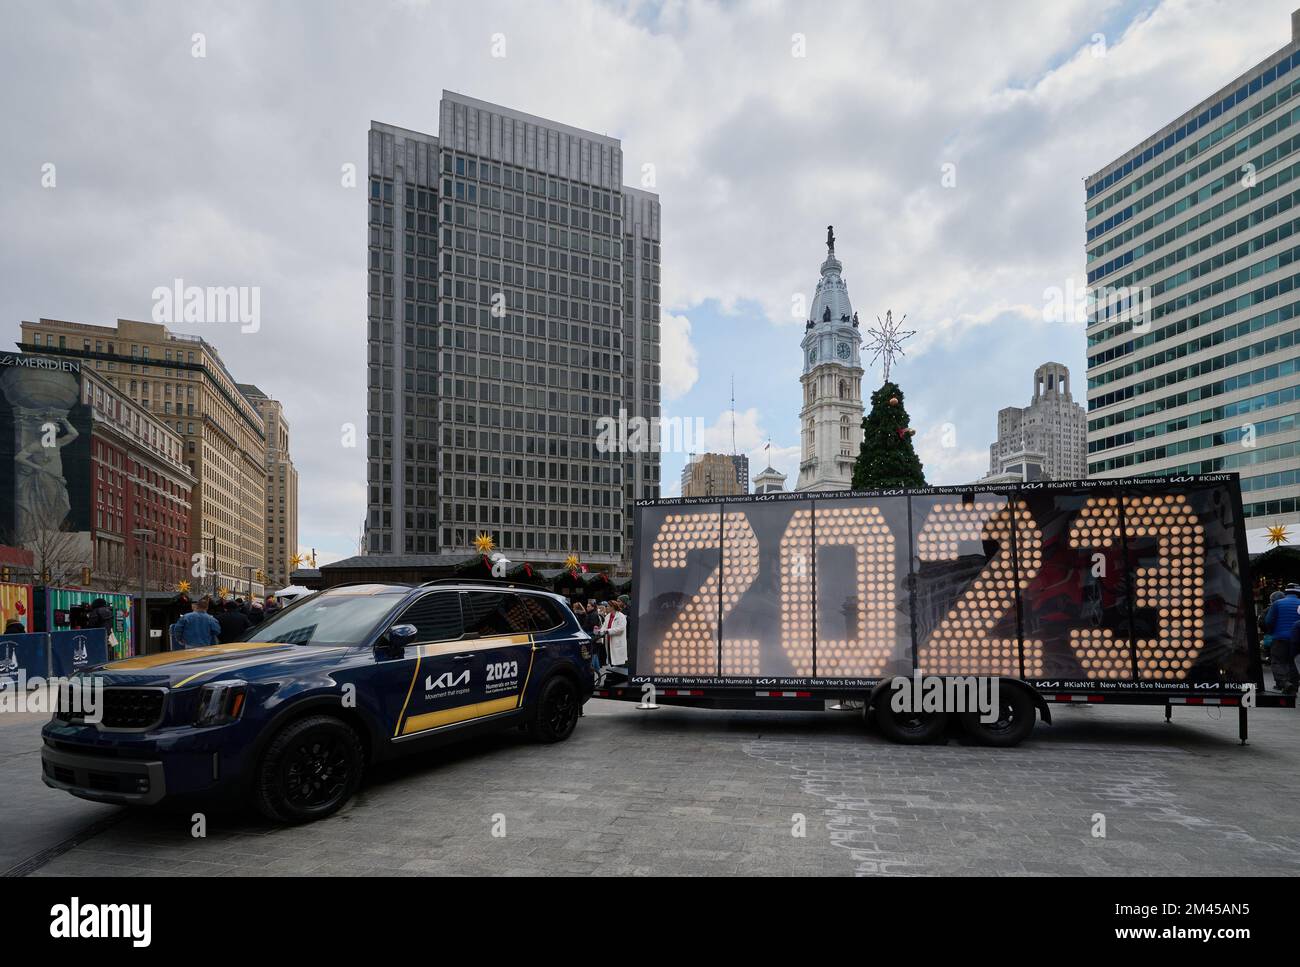 PHILADELPHIA, PA, USA - DECEMBER 18, 2022: Times Square New Year's Eve 2023 Numerals at Christmas Village. Stock Photo